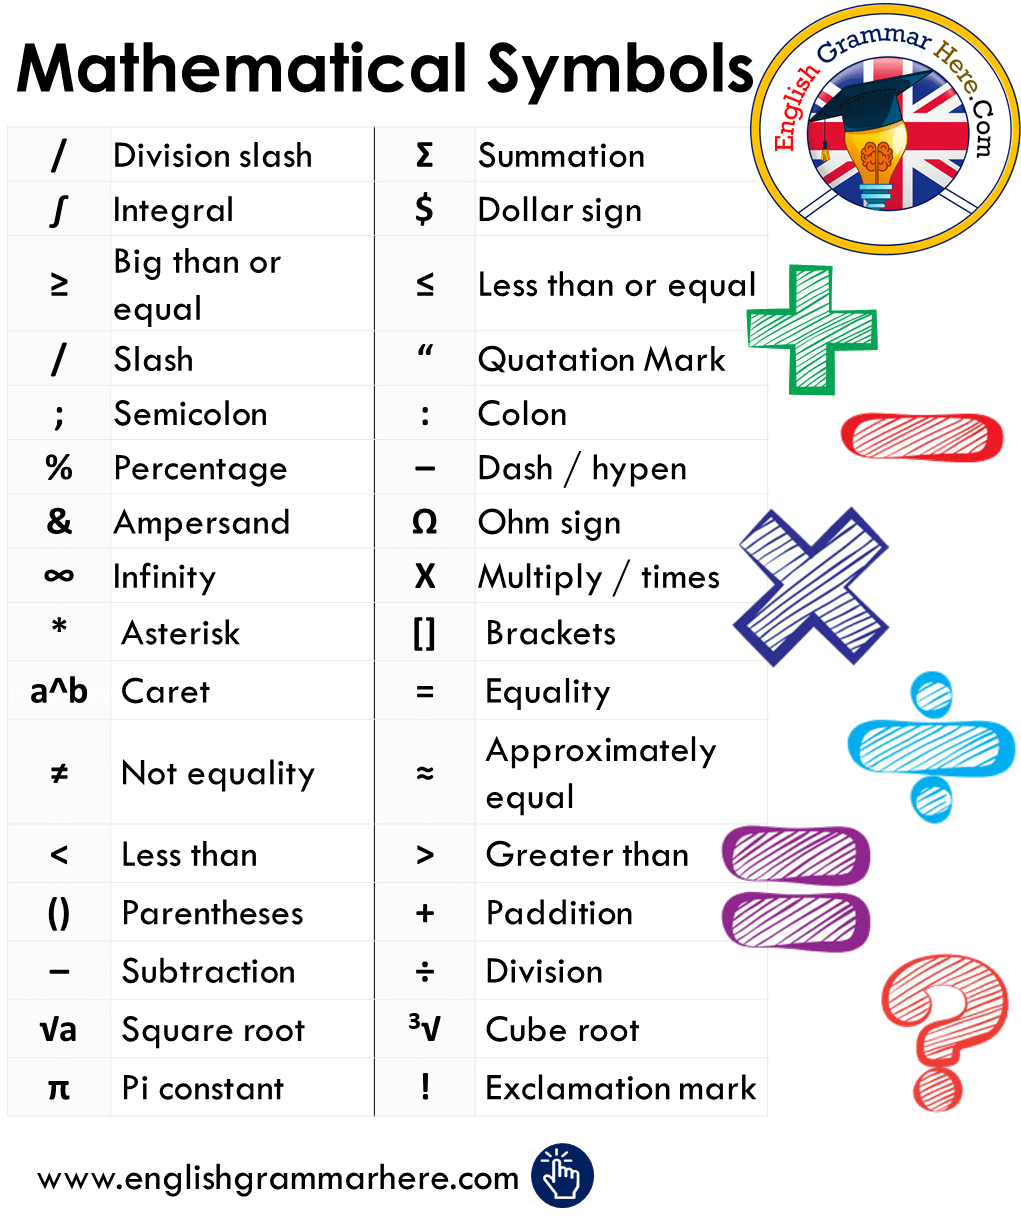 Mathematical Symbols List and Meanings